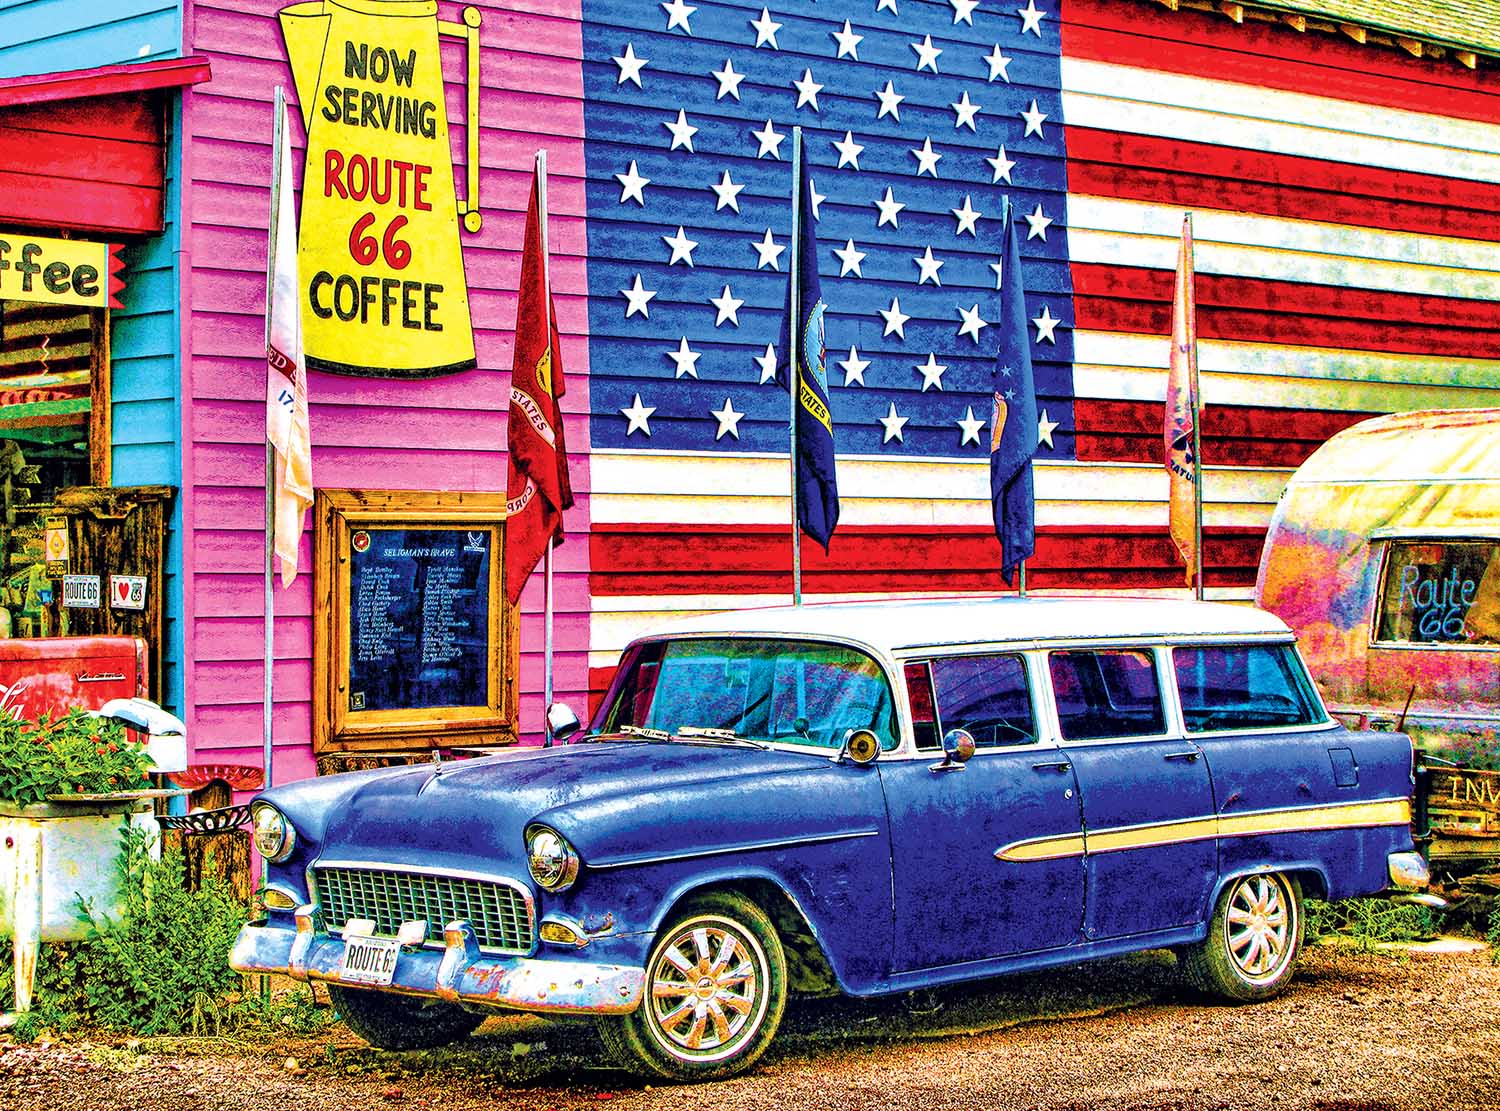 Route 66 - Scratch and Dent Car Jigsaw Puzzle